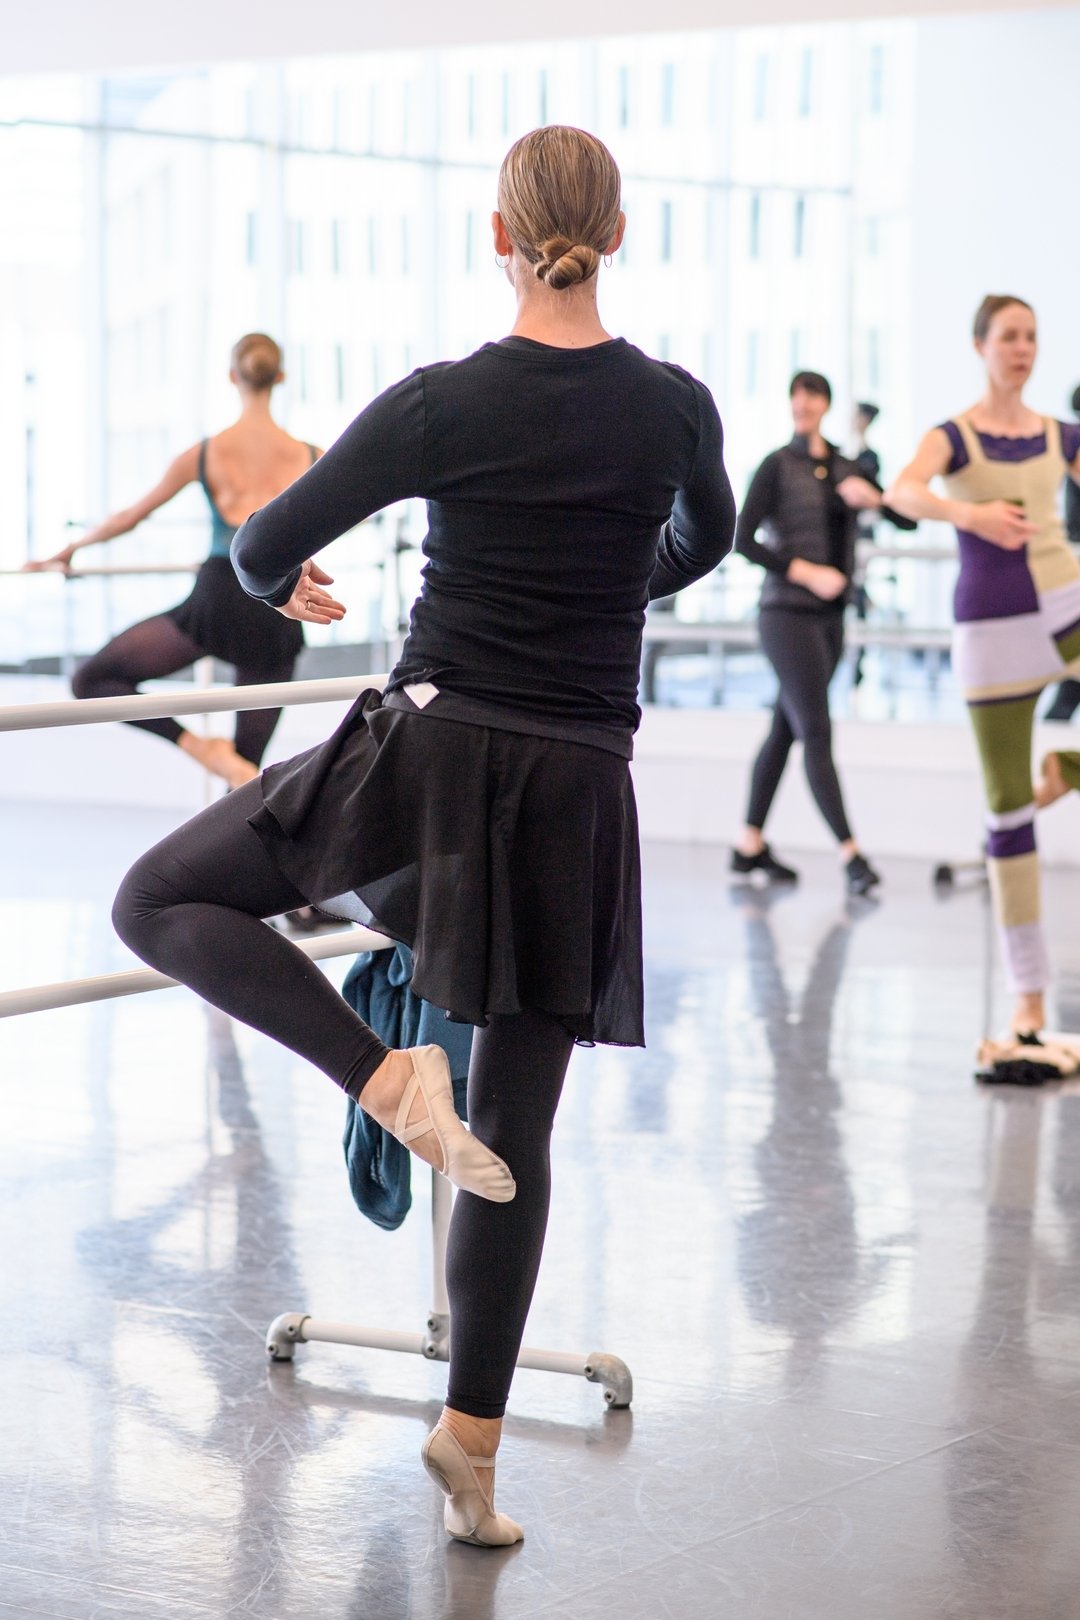 We have class today!⁣

Adult Advanced Ballet Classes.​​​​​​​​​​​​​​:​​​​​​​​​​​​​​​​

​​​​​​​​Wednesday - 7:15 to 8:45 pm (Register through DJD's portal) ​​​​​​​​​​​​​​​​​​​​​​​​​​​​​​​​
​​​​​​​​​​​​​​​​​​​​​​​​​​​​Friday 5:30 to 7:00 pm 
Saturday 12